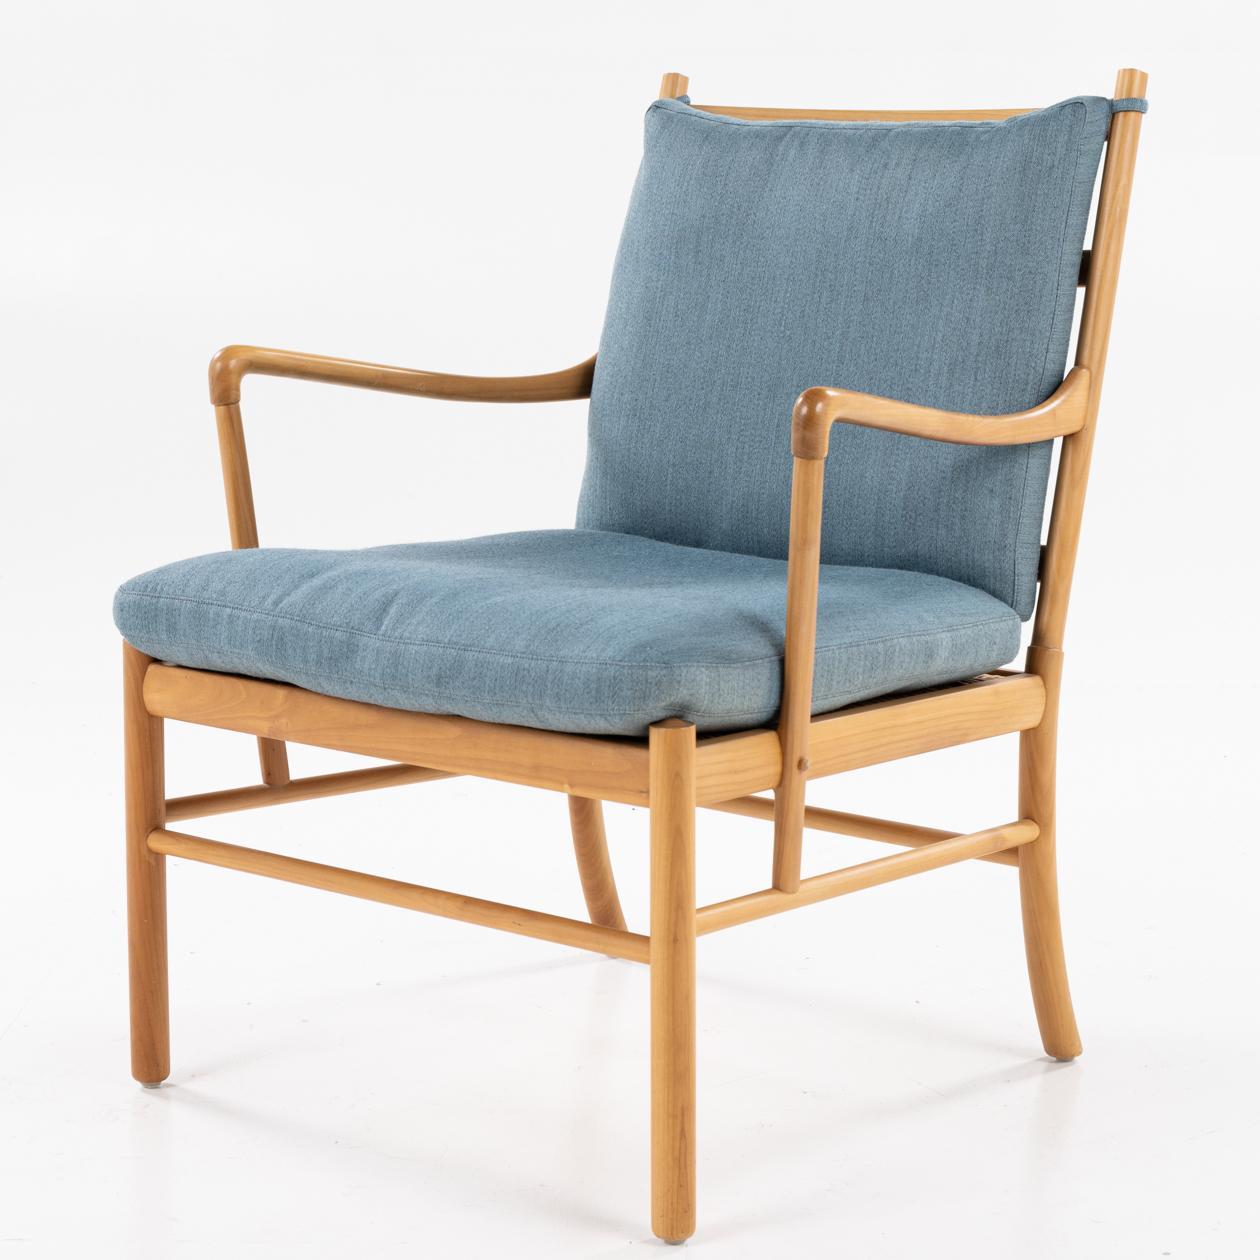 Pair of PJ 149 - 'Colonial Chairs' in cherry wood, seat bottom in cane and original cushions in blue wool. Marked from manufacturer. Ole Wanscher / P. J Furniture